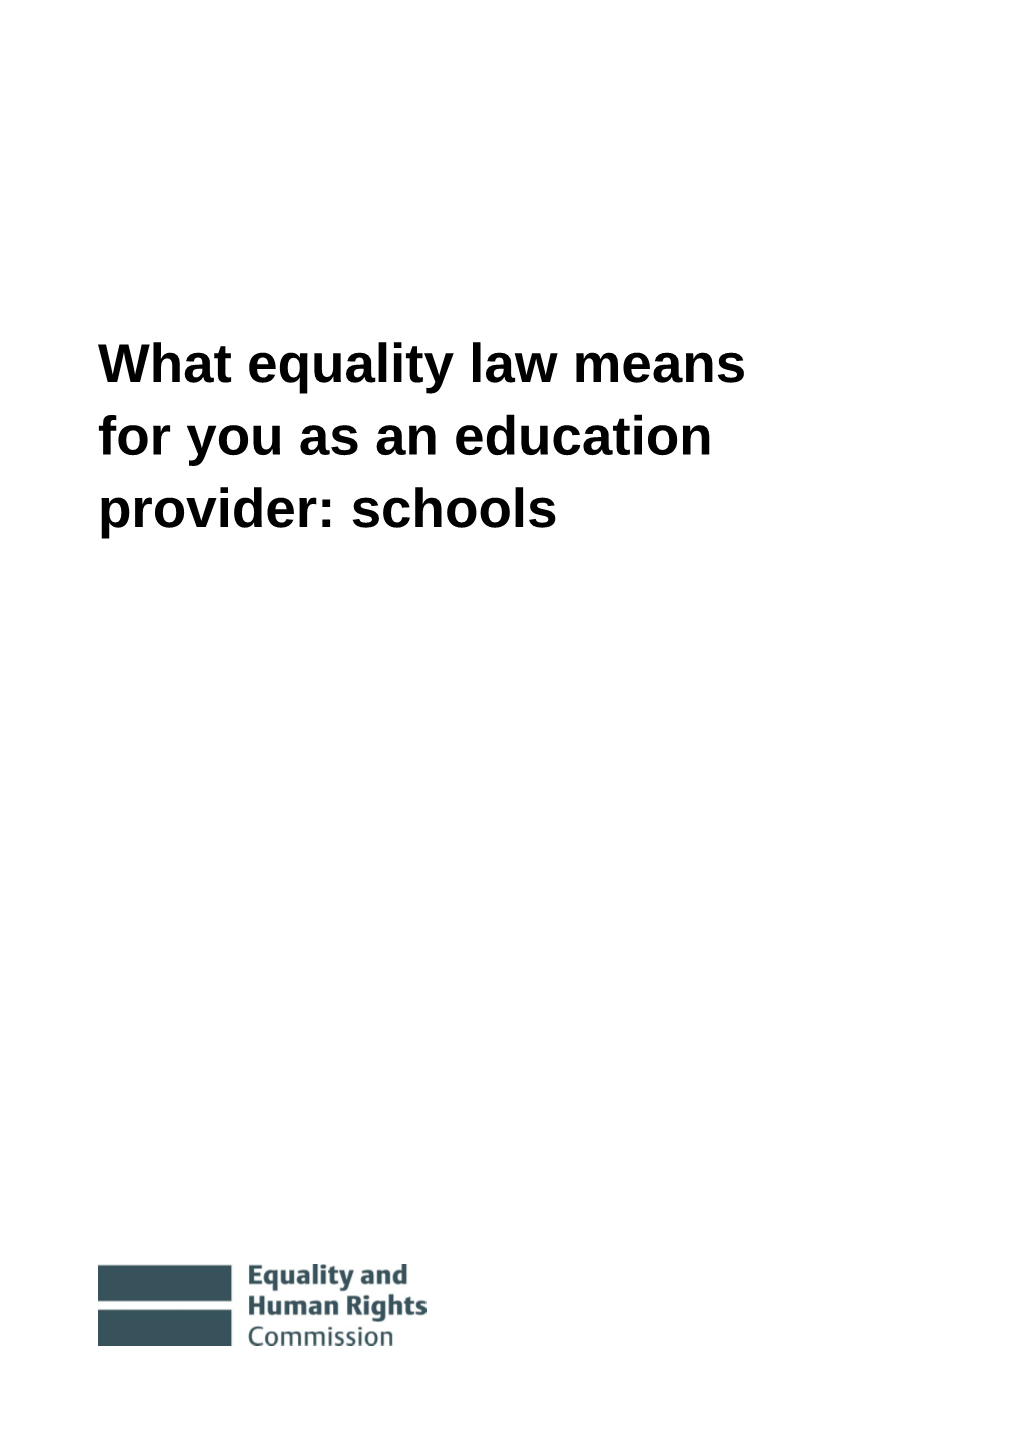 What Equality Law Means for You As an Education Provider: Schools